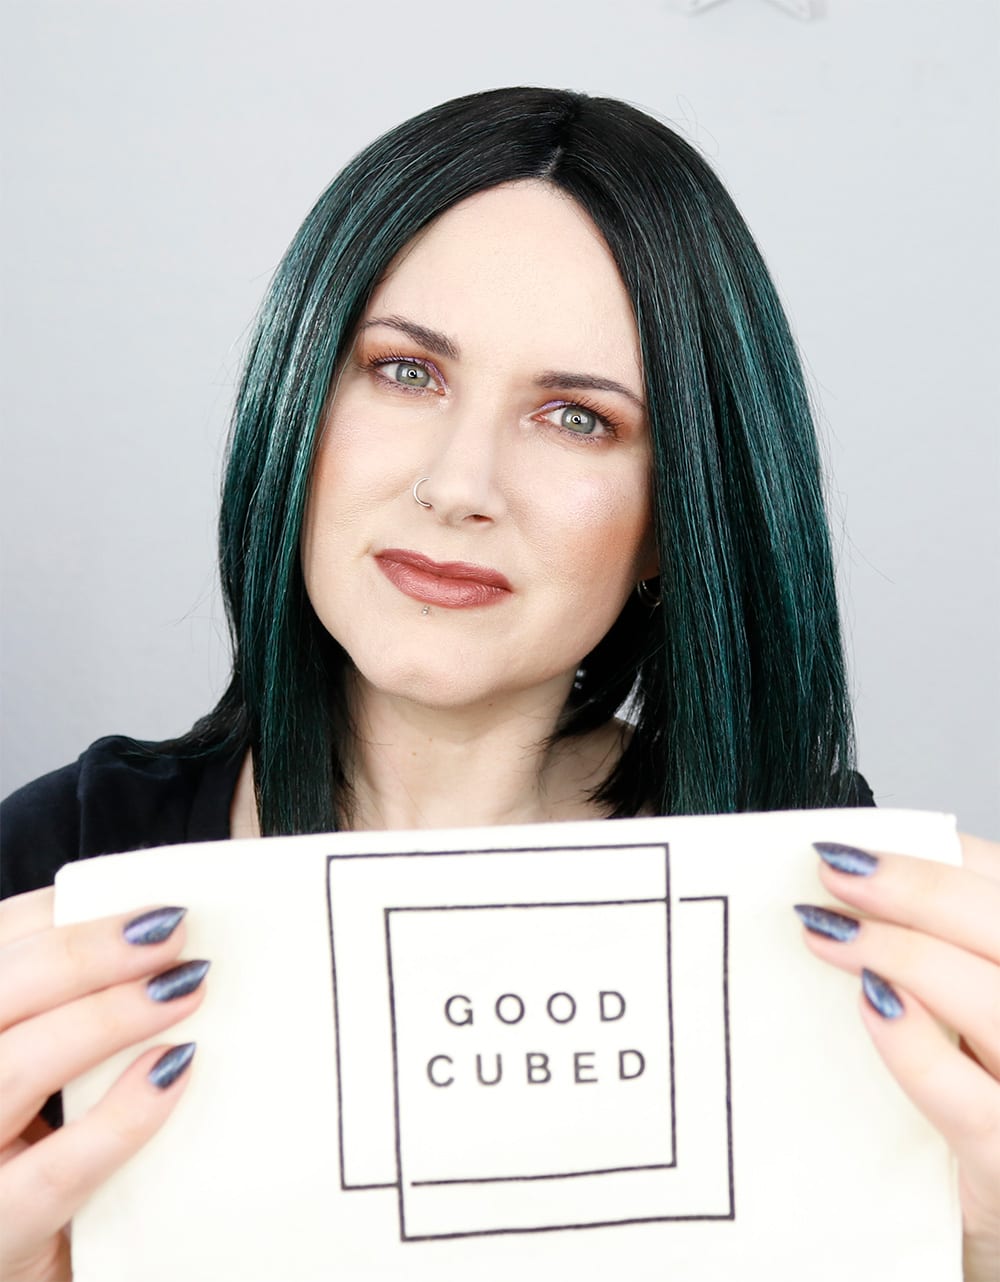 Cruelty Free Makeup at Good Cubed